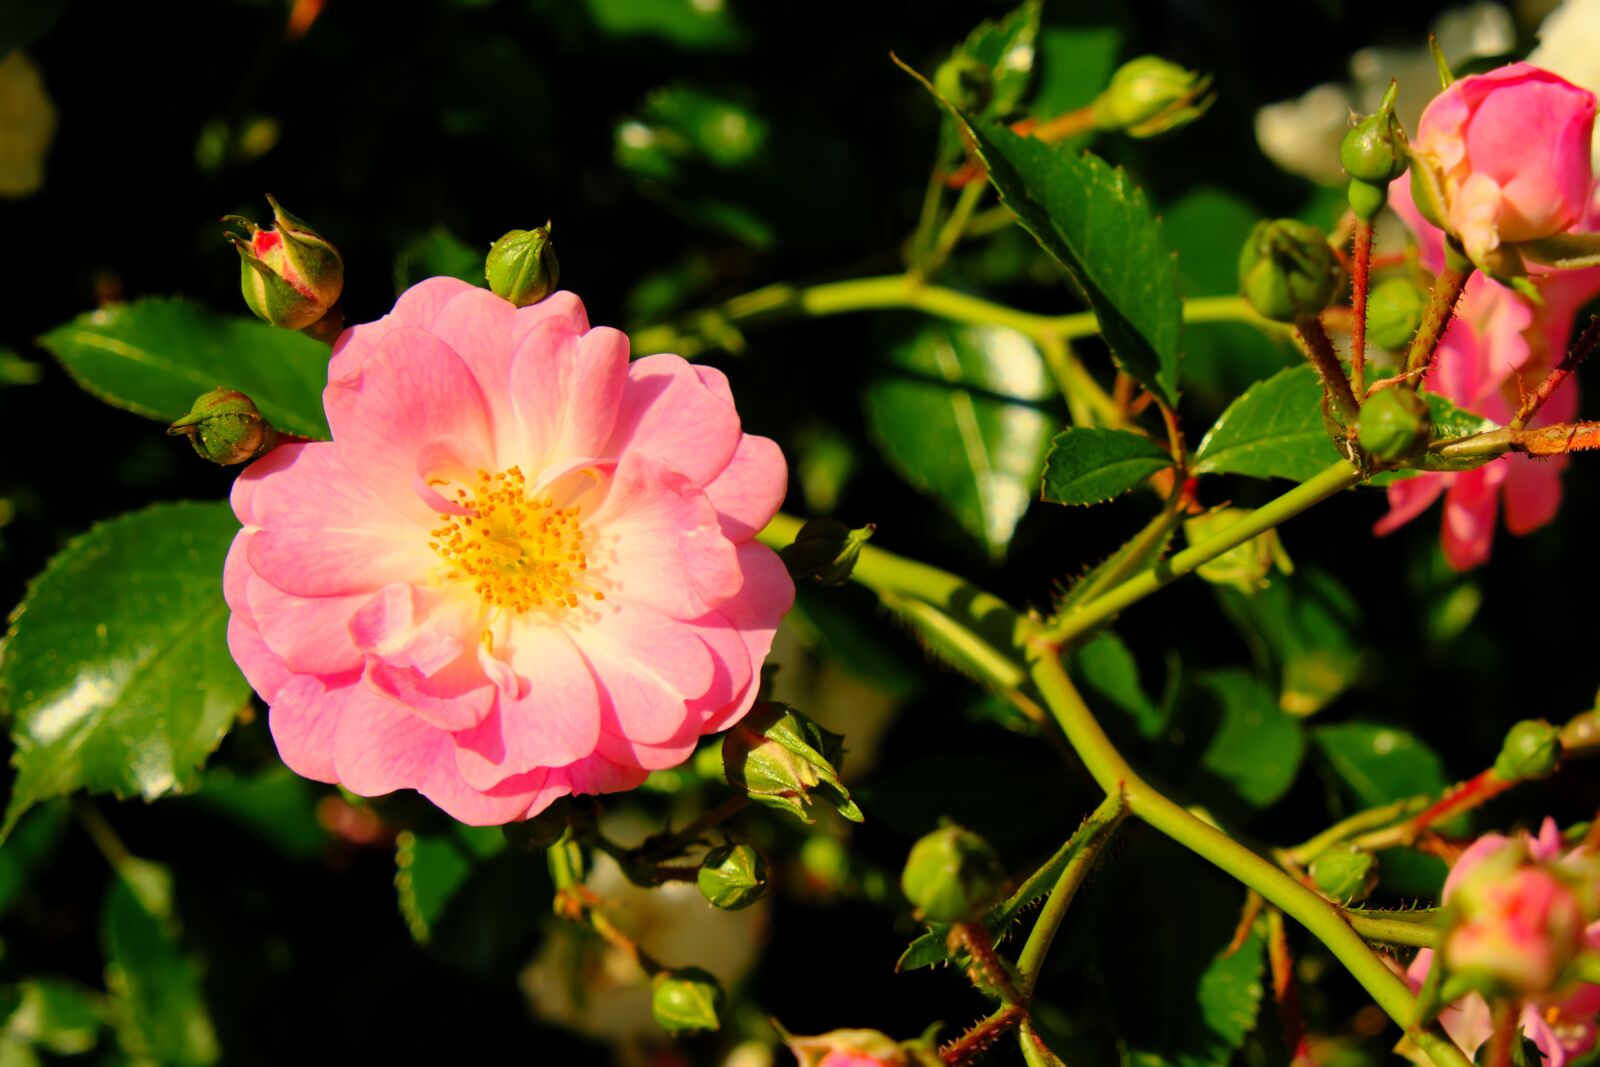 Fujifilm X-T20 sample photo. Flower, nature, spring photography